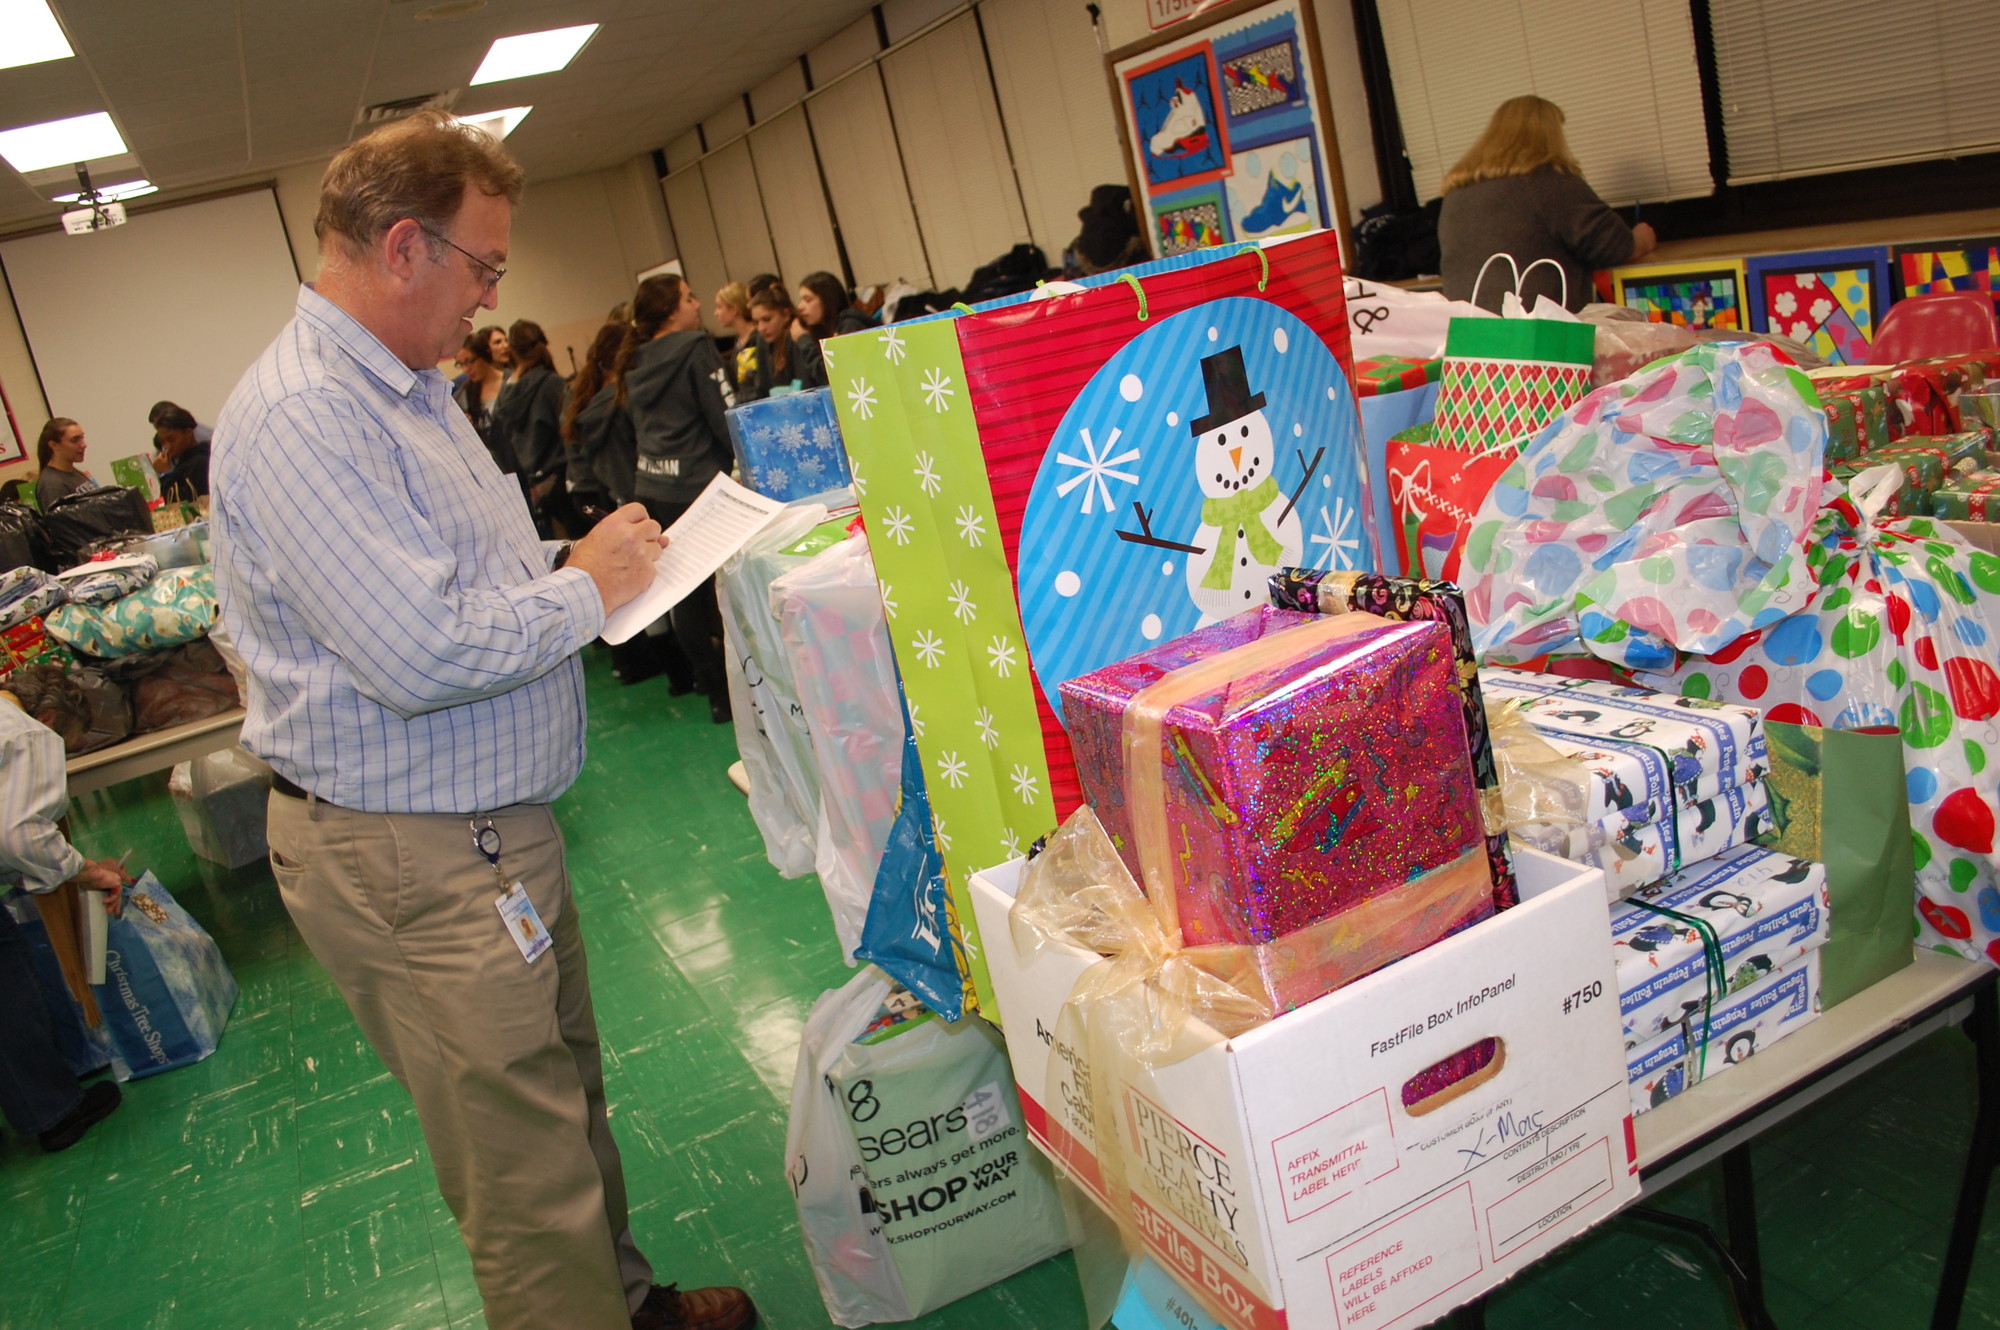 Technology specialist Leo Vanderburg checked over the donations for students at Lee Road Elementary School.